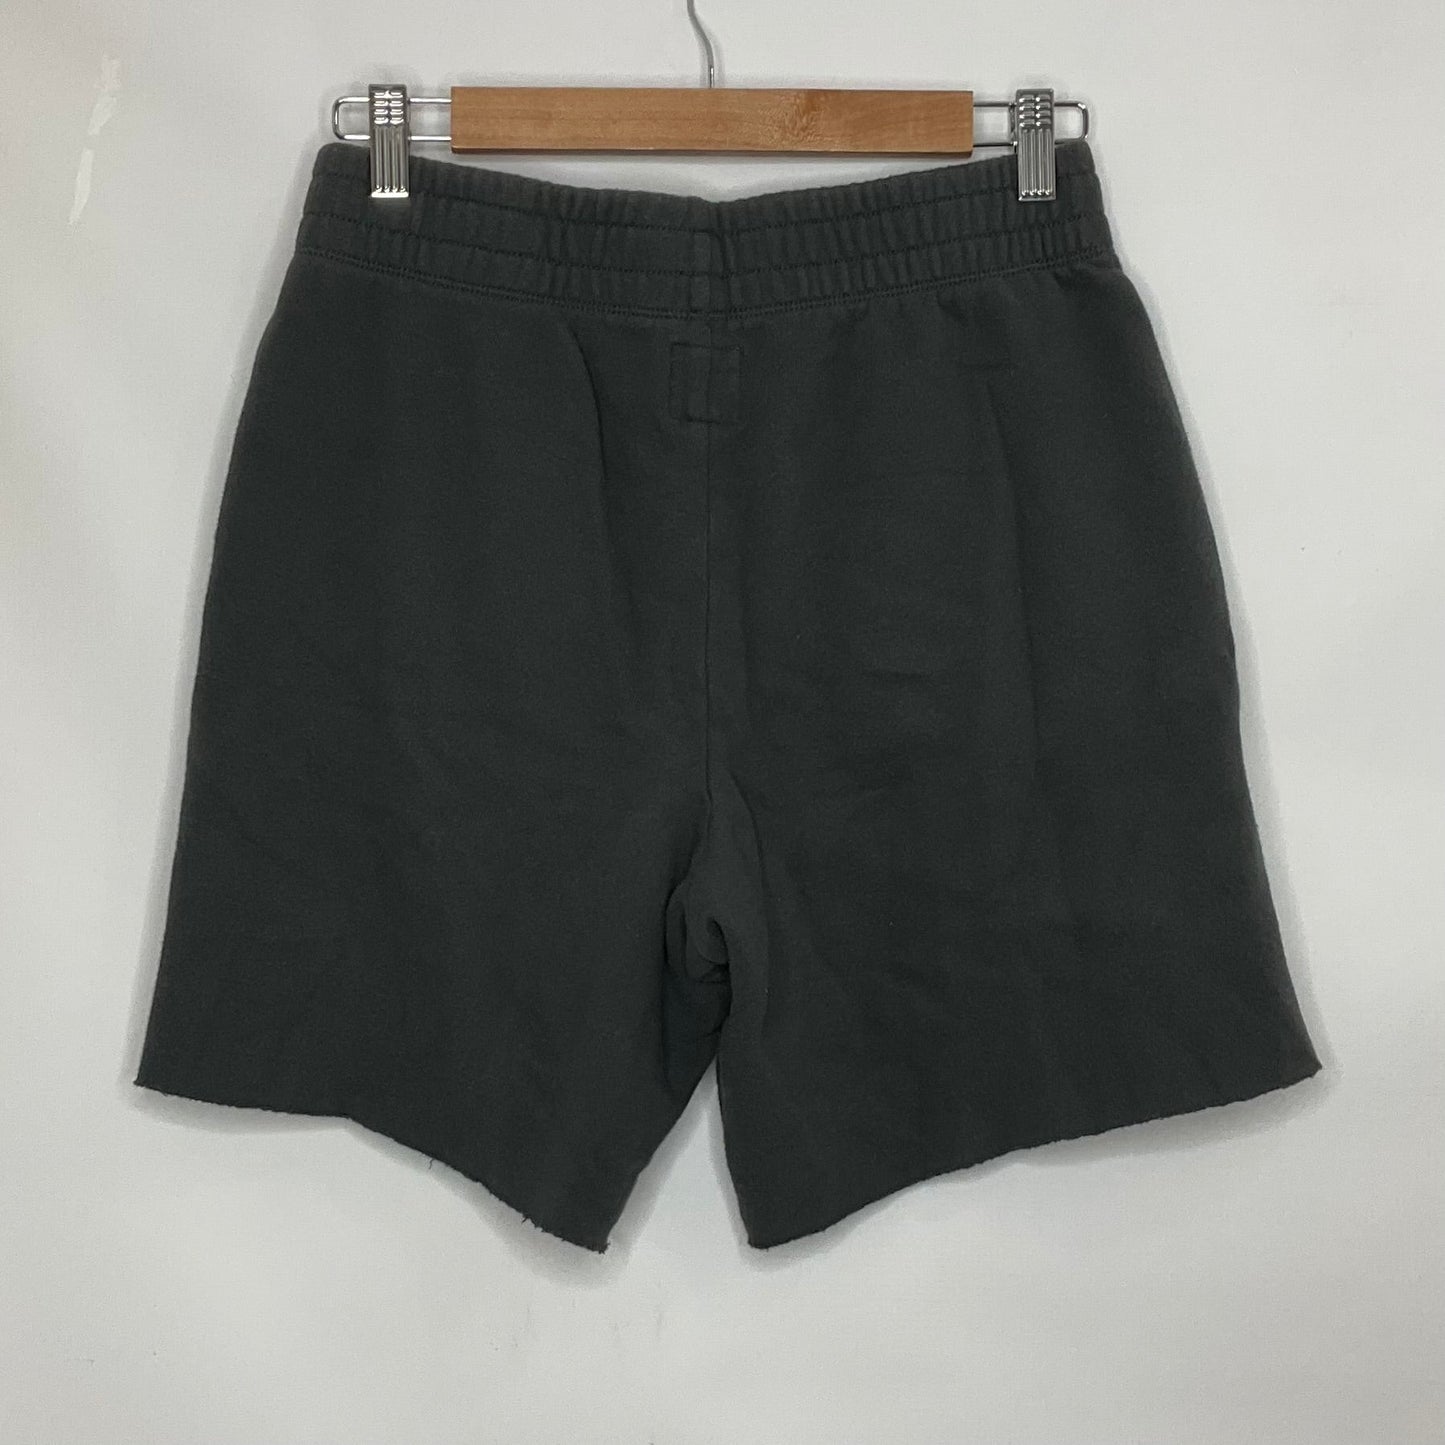 Grey Shorts Aerie, Size S